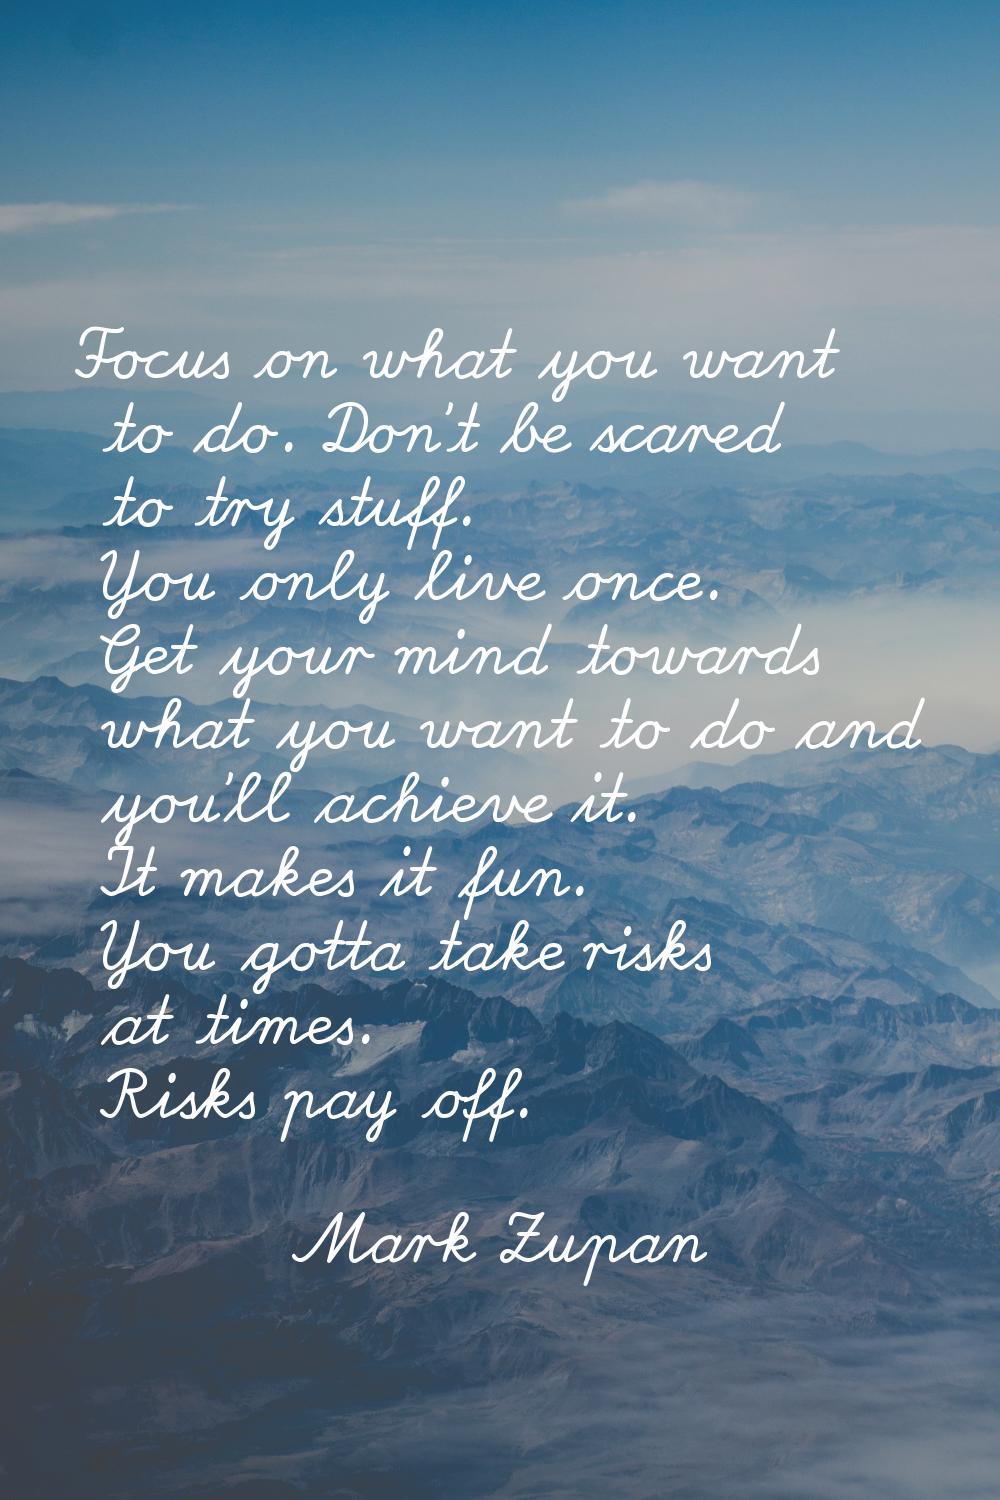 Focus on what you want to do. Don't be scared to try stuff. You only live once. Get your mind towar